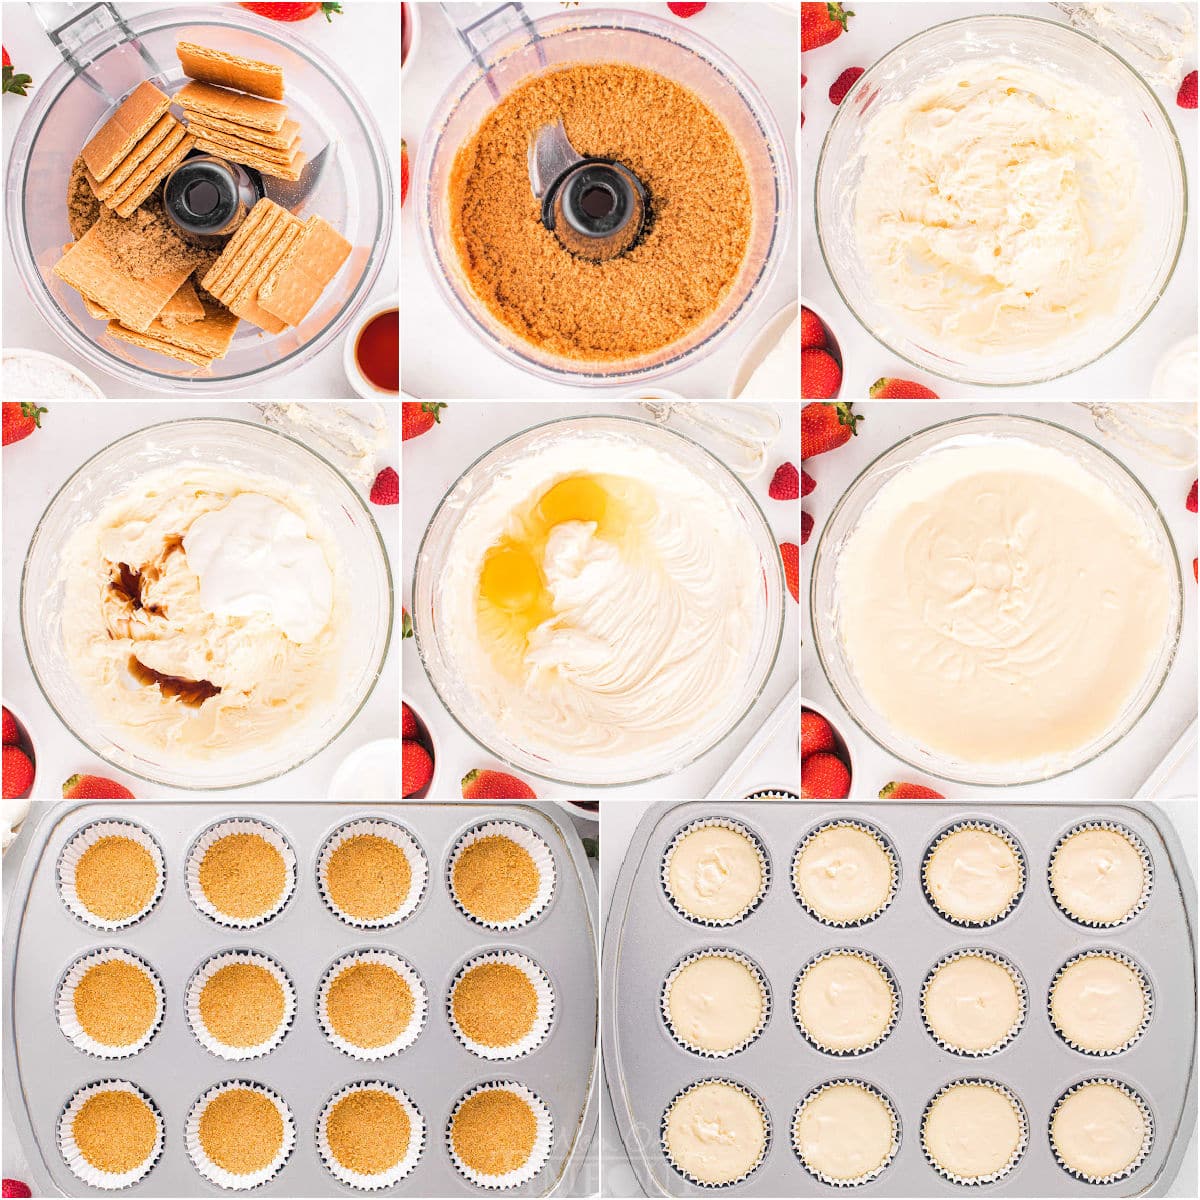 eight image collage showing how to make mini cheesecakes step by step.